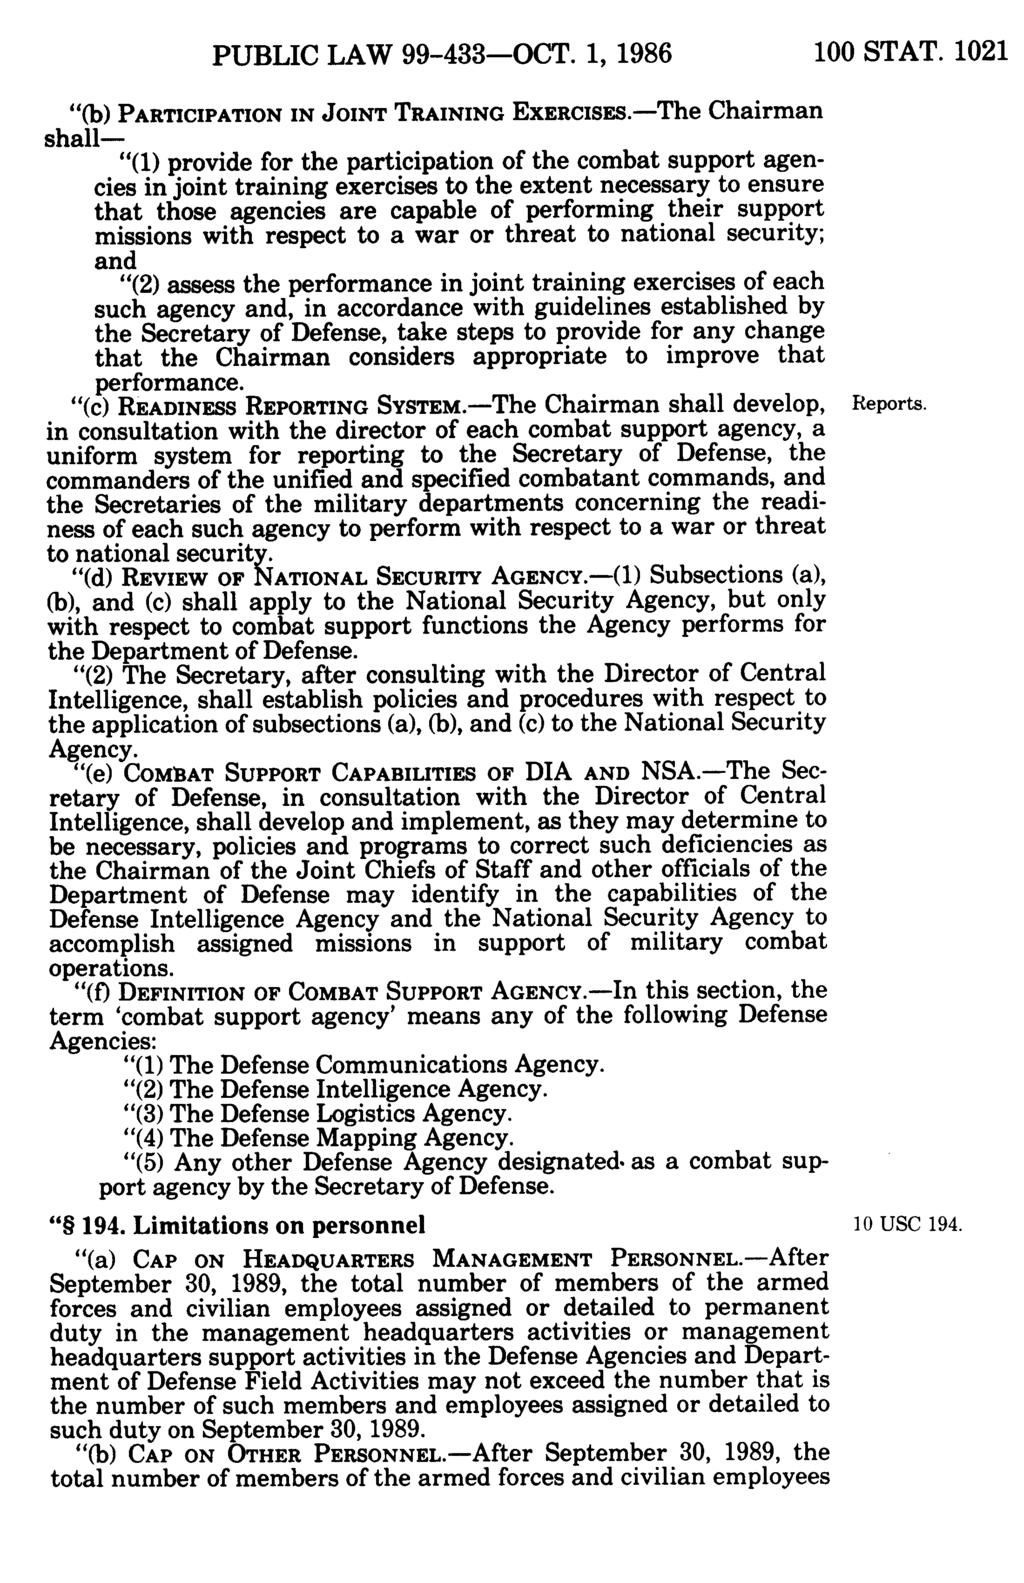 PUBLIC LAW 99-433-OCT. 1, 1986 100 STAT. 1021 (b) PARTICIPATION IN JOINT TRAINING EXERCISES.